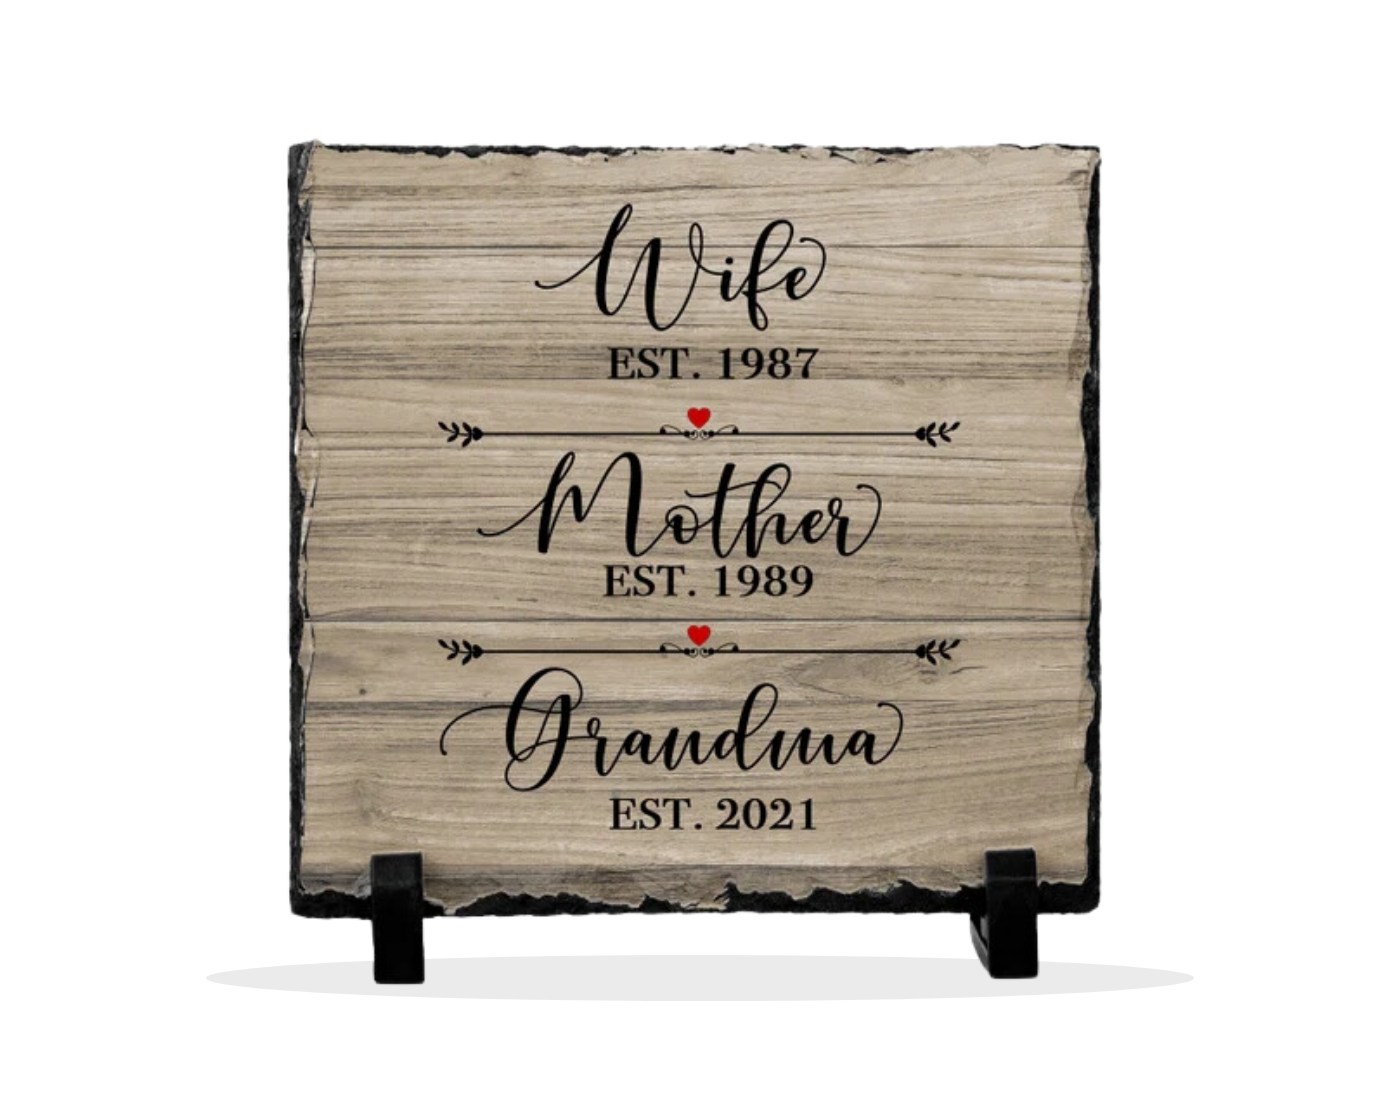 Personalized Grandma Slate Plaque, mothers day gift ideas, Birthday Gift, Grandparents gift, Grandma gift, pregnancy reveal idea